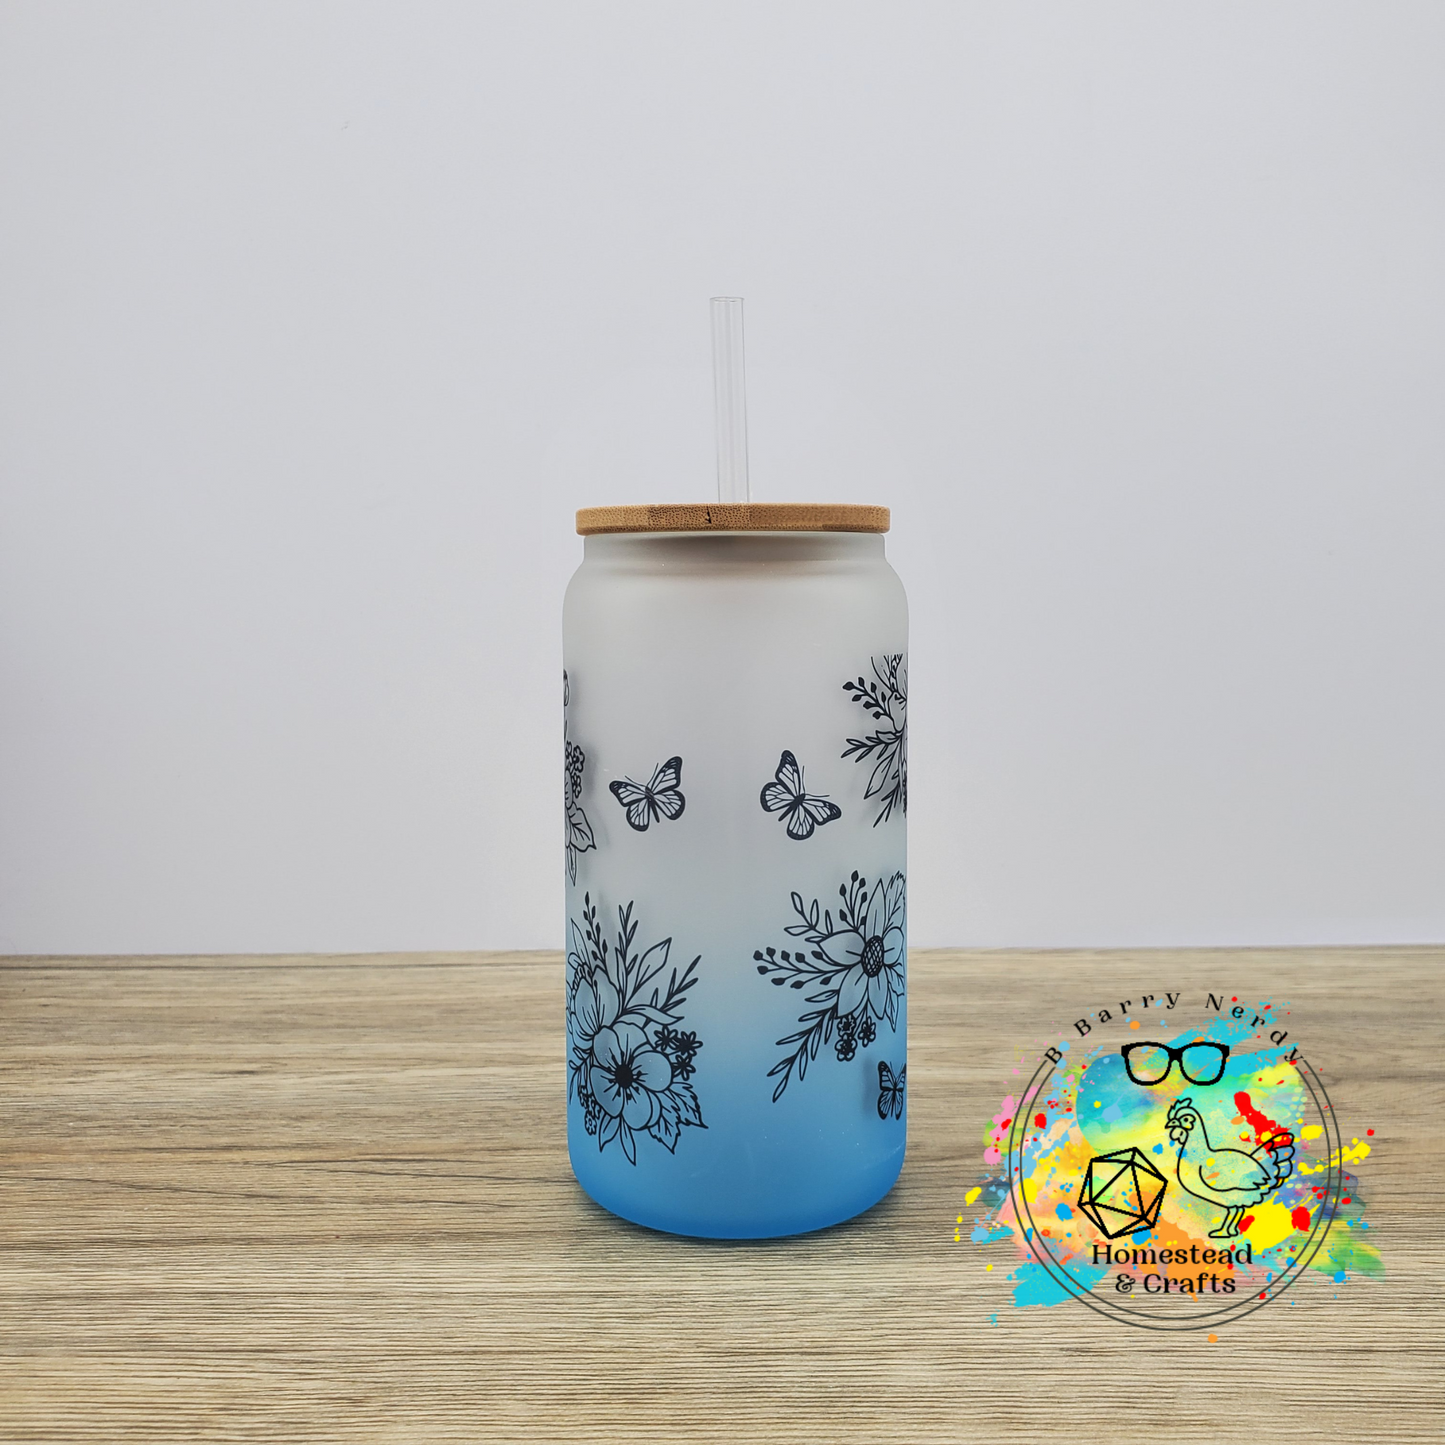 Chaos Coordinator in Floral Print, 16oz Sublimated Glass Can